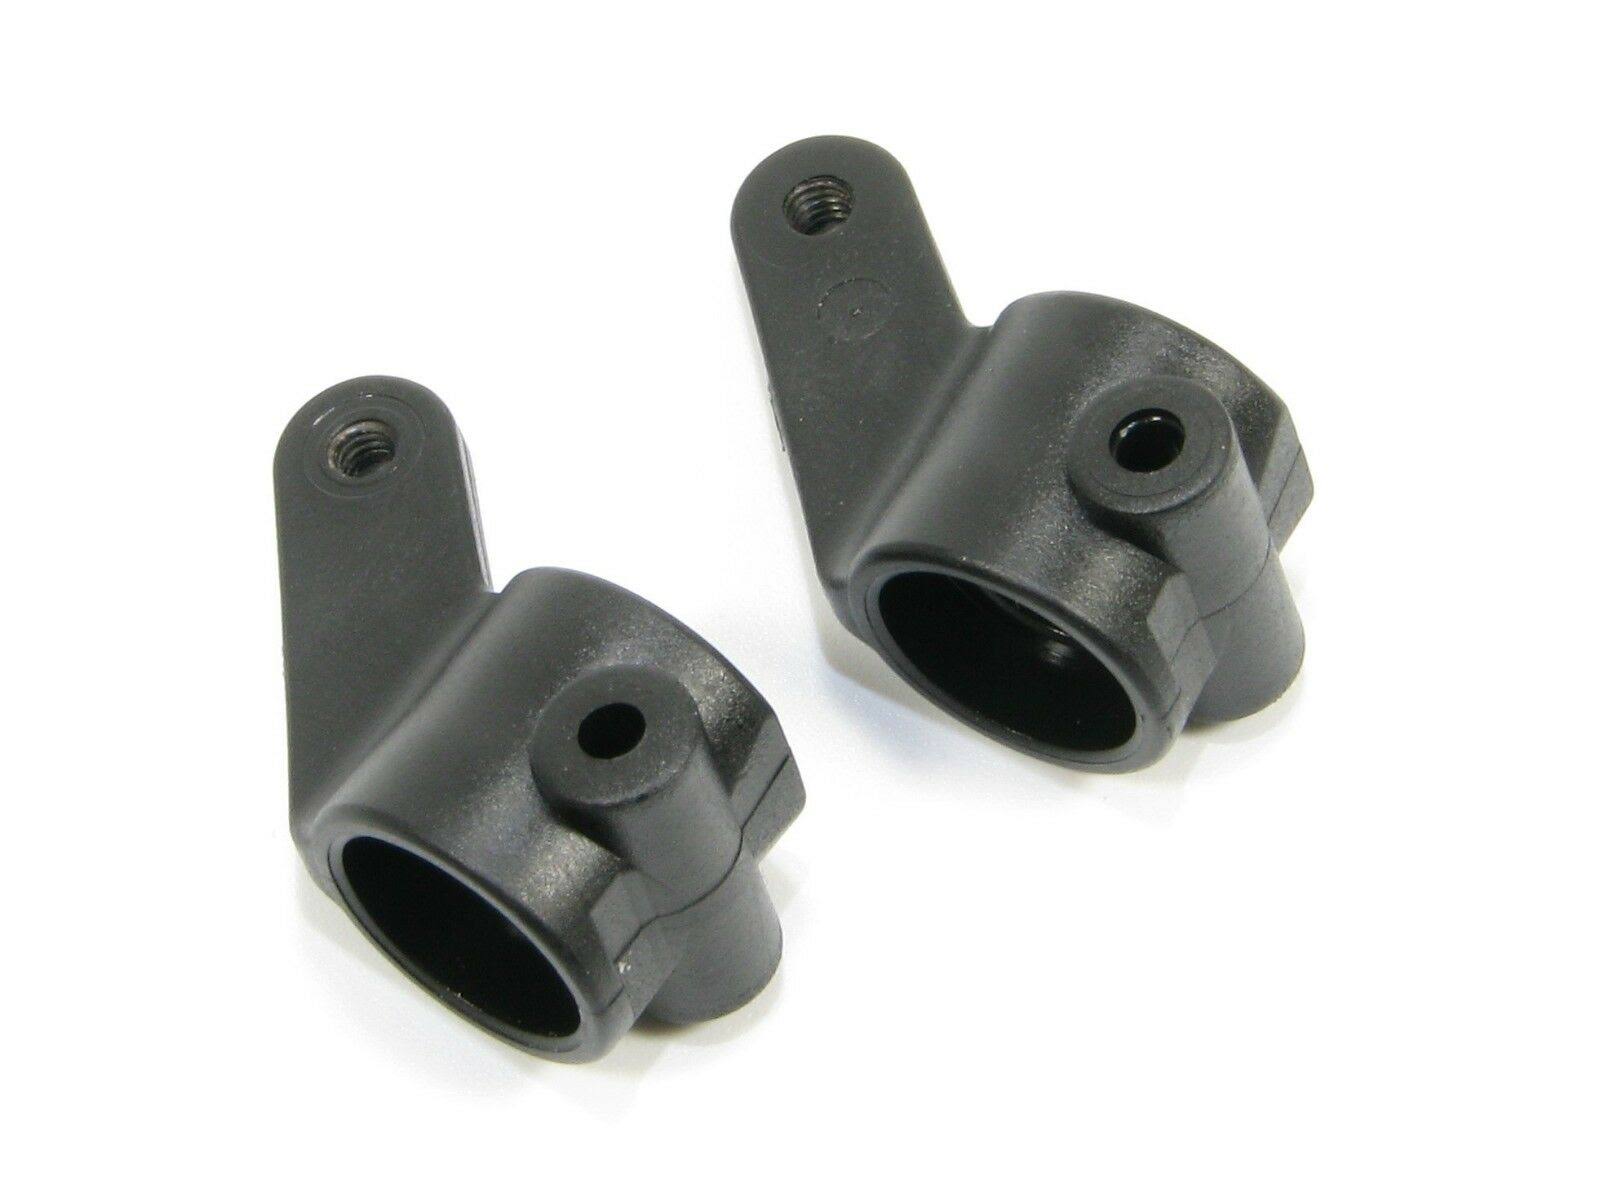 Traxxas Left and Right Steering Blocks - 5 x 11 x 4mm